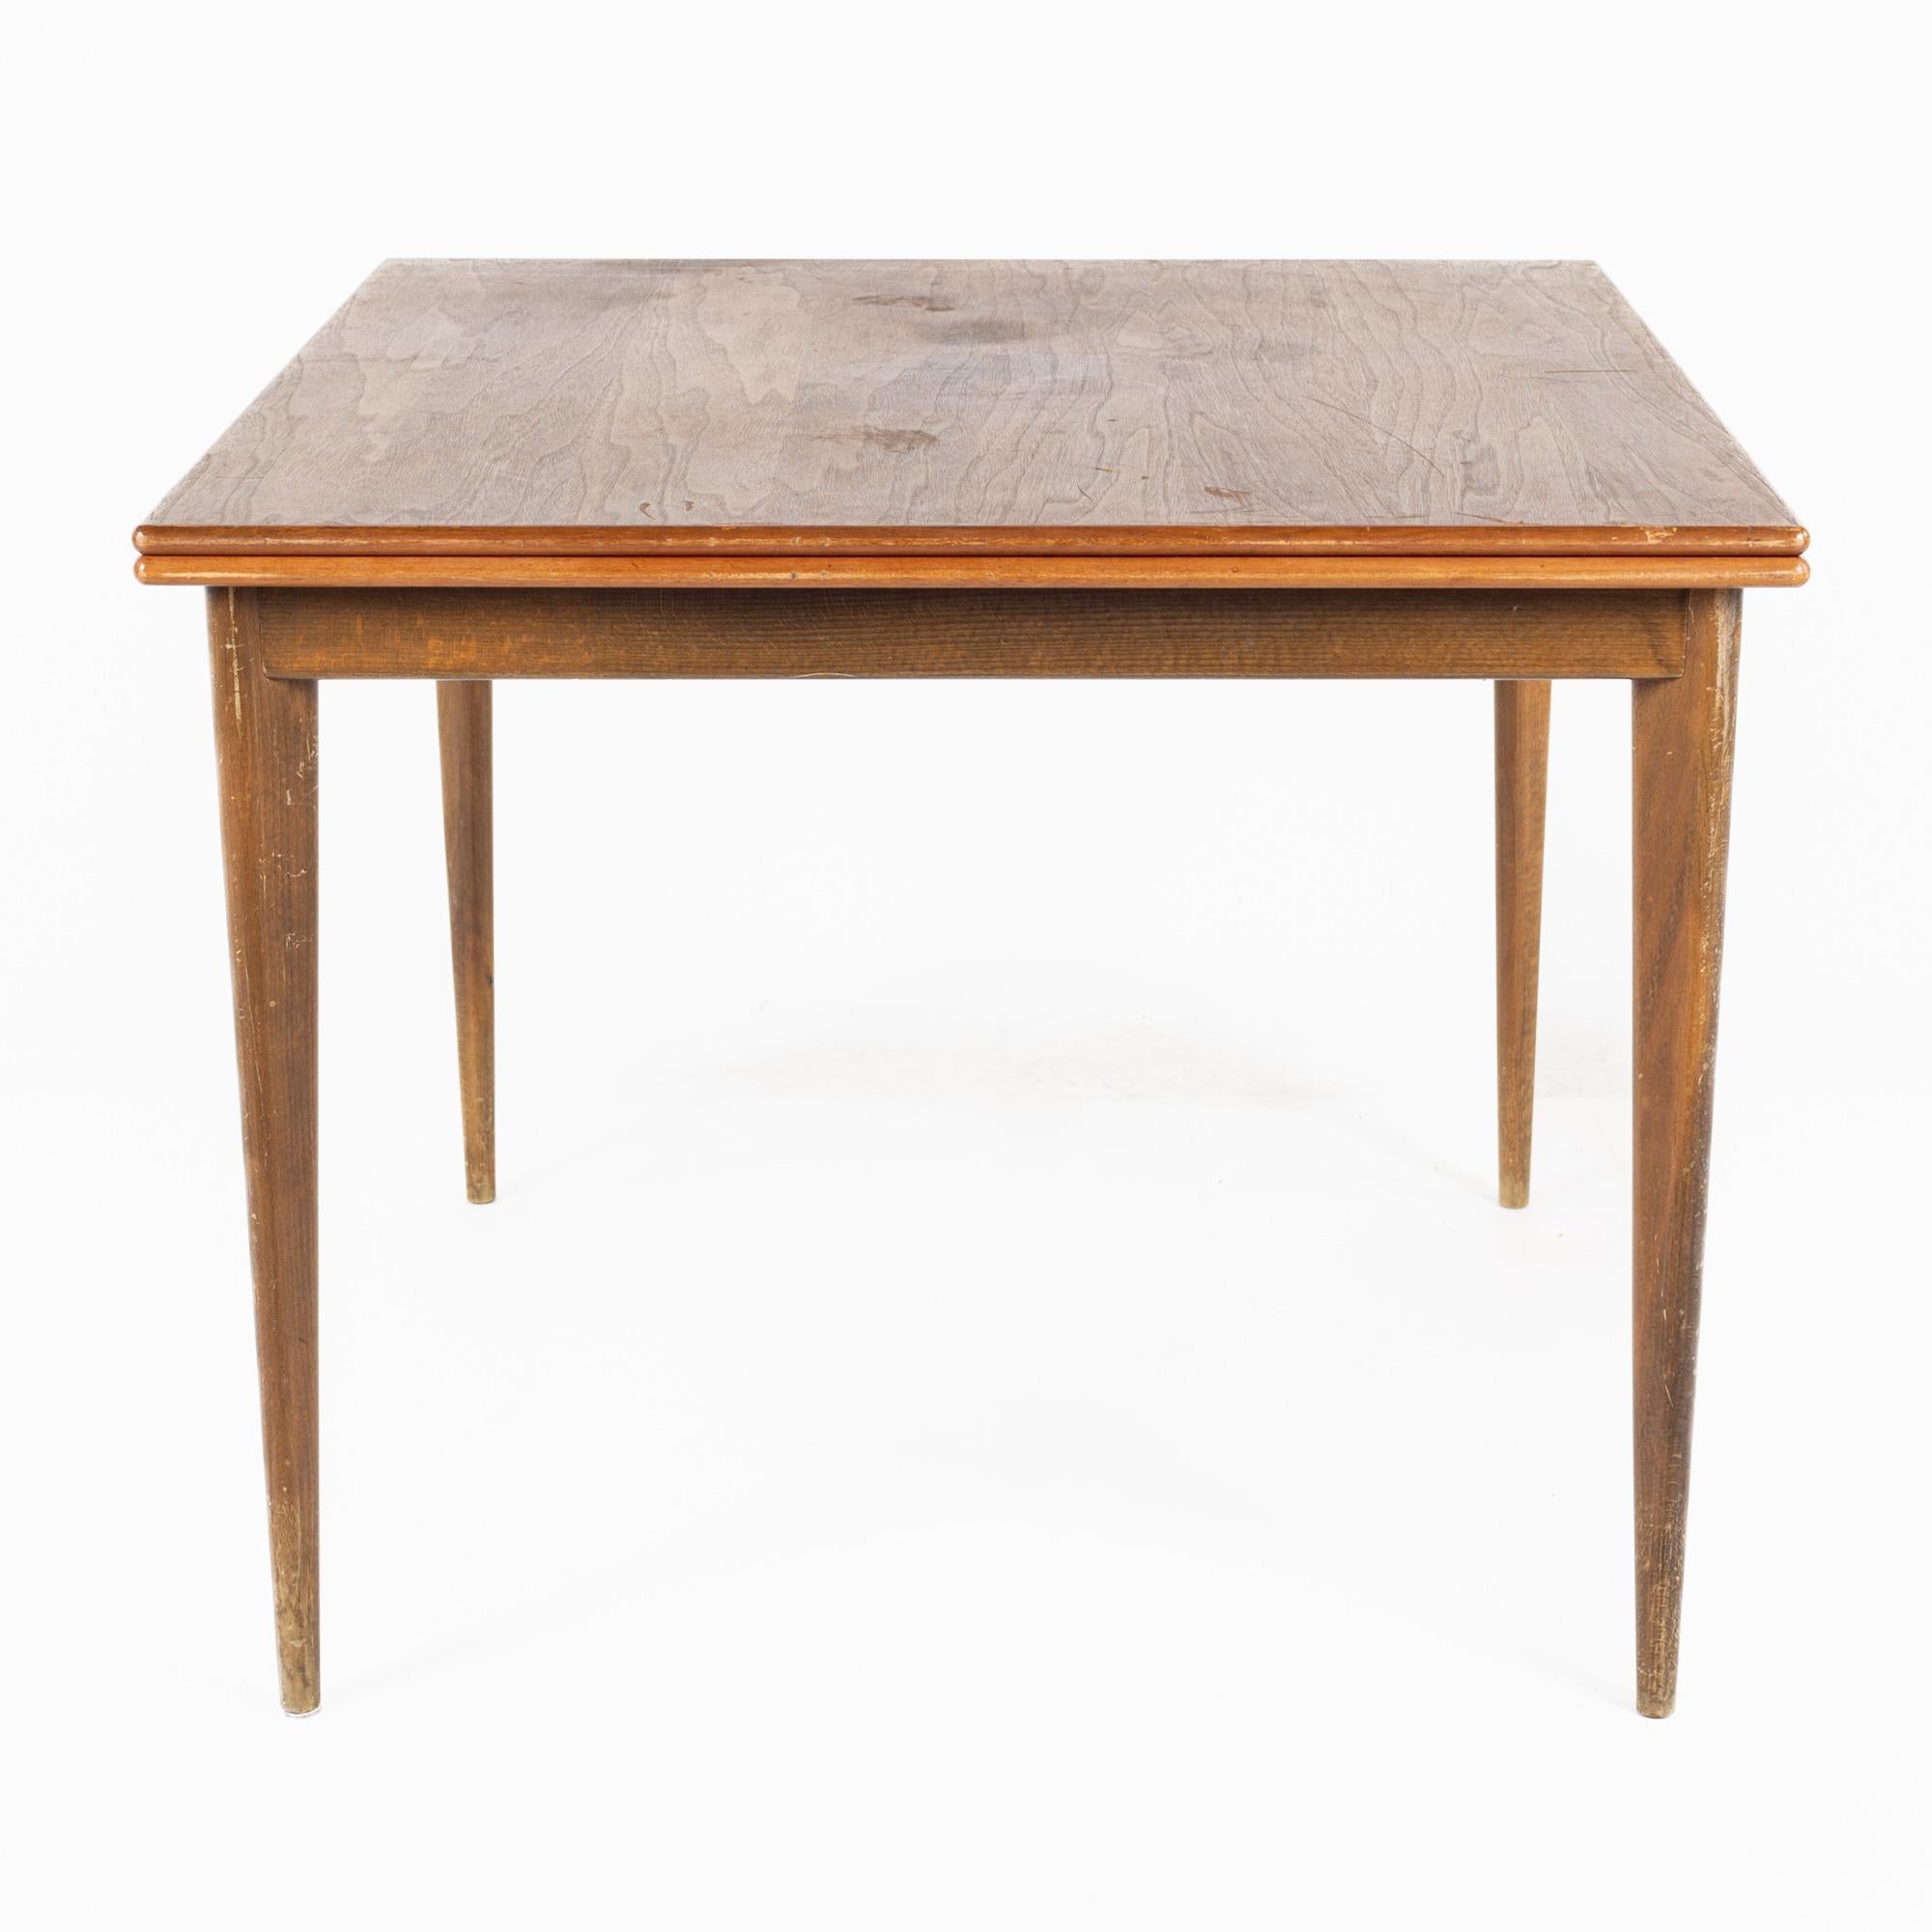 Dux style walnut mid-century flip top dining table

This table measures: 71 wide x 35.5 deep x 29 inches high, with a chair clearance of 25 inches

All pieces of furniture can be had in what we call restored vintage condition. That means the